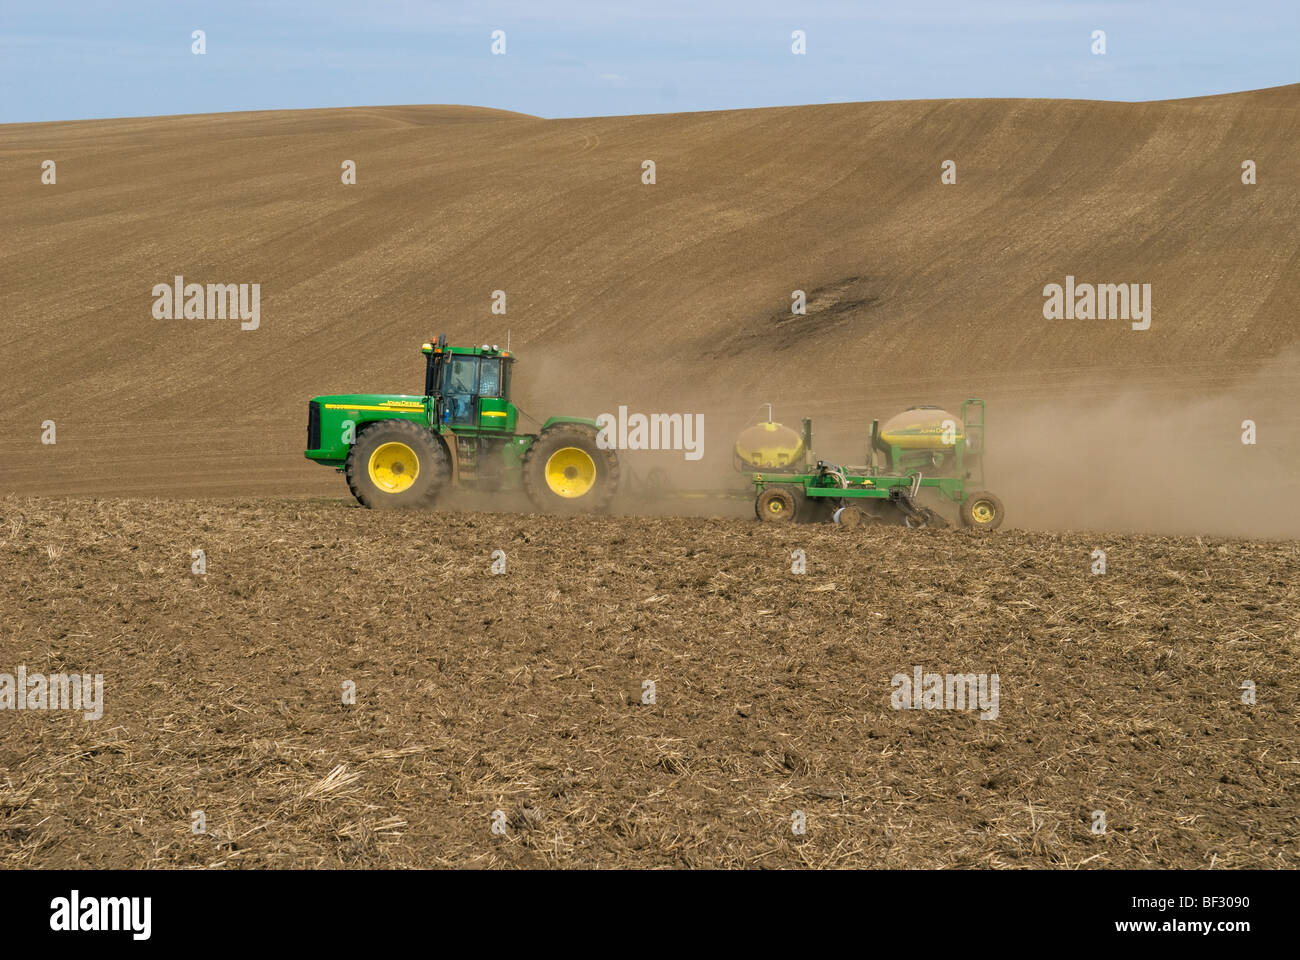 A John Deere tractor and air seeder planting garbanzo beans (chick peas) in the rolling hills of the Palouse / Washington, USA. Stock Photo